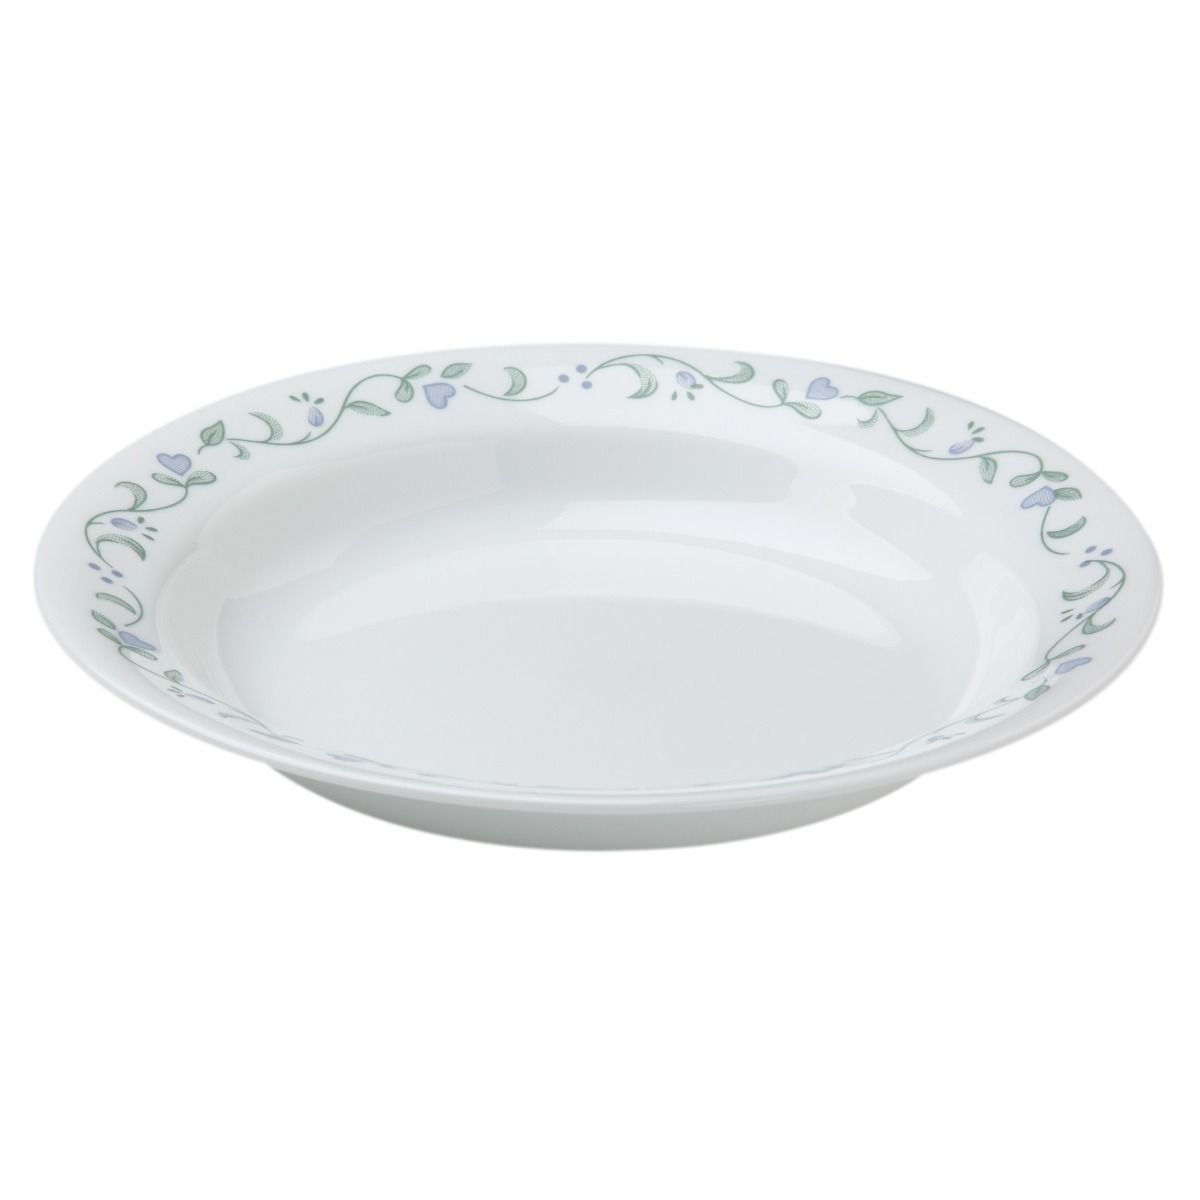 Corelle Country Cottage, White and Green Round 12-Piece Dinnerware